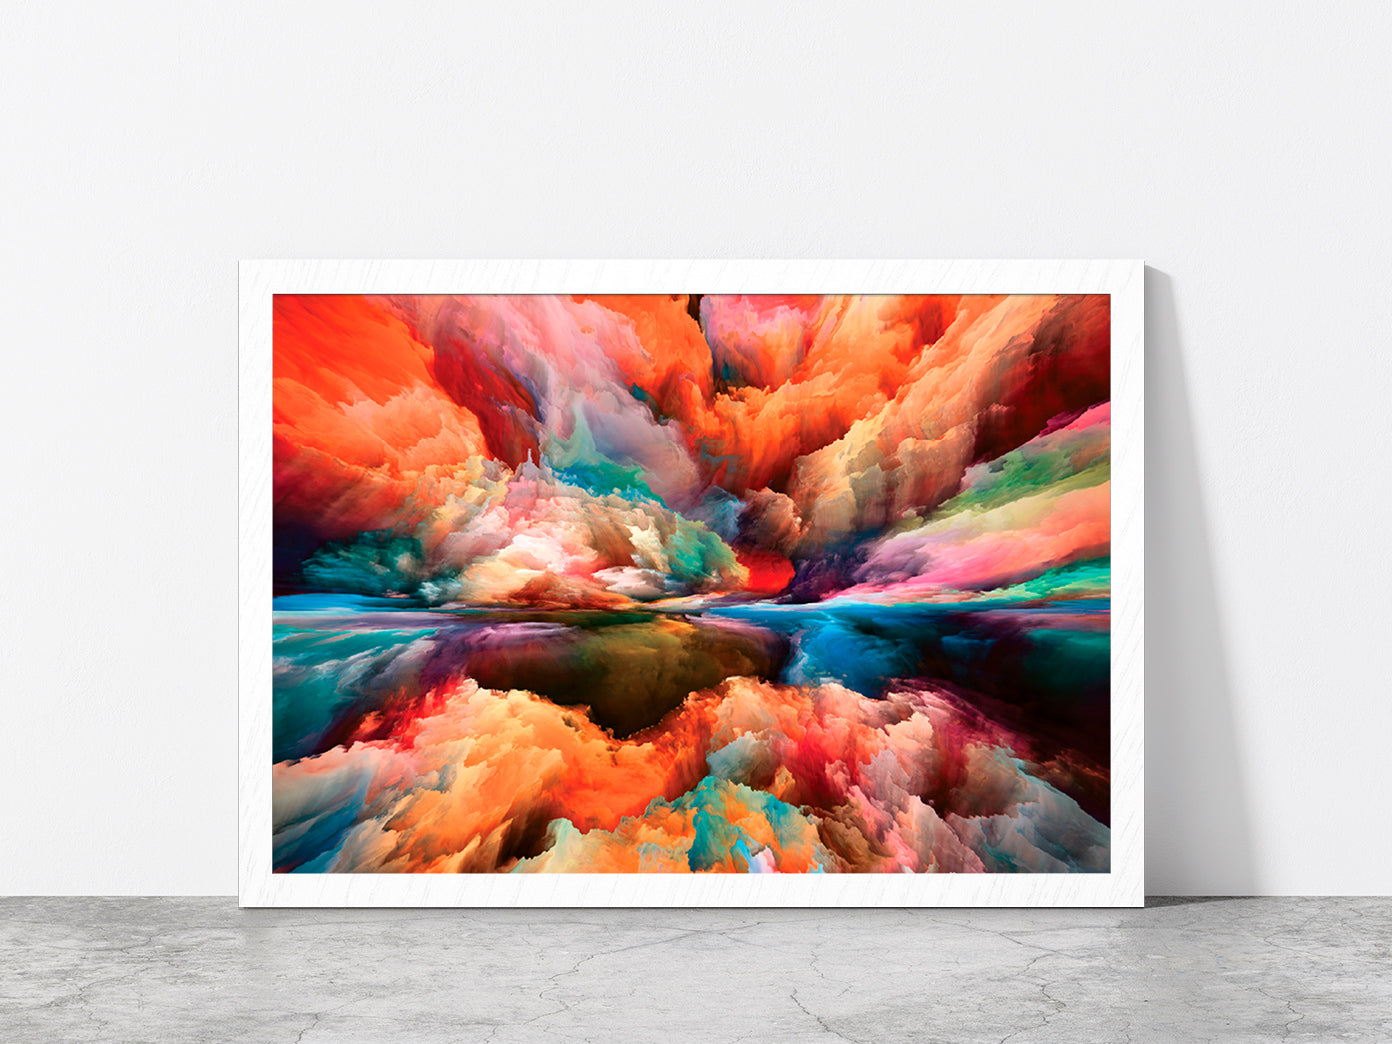 Colorful Abstract Cloud Paint Glass Framed Wall Art, Ready to Hang Quality Print Without White Border White